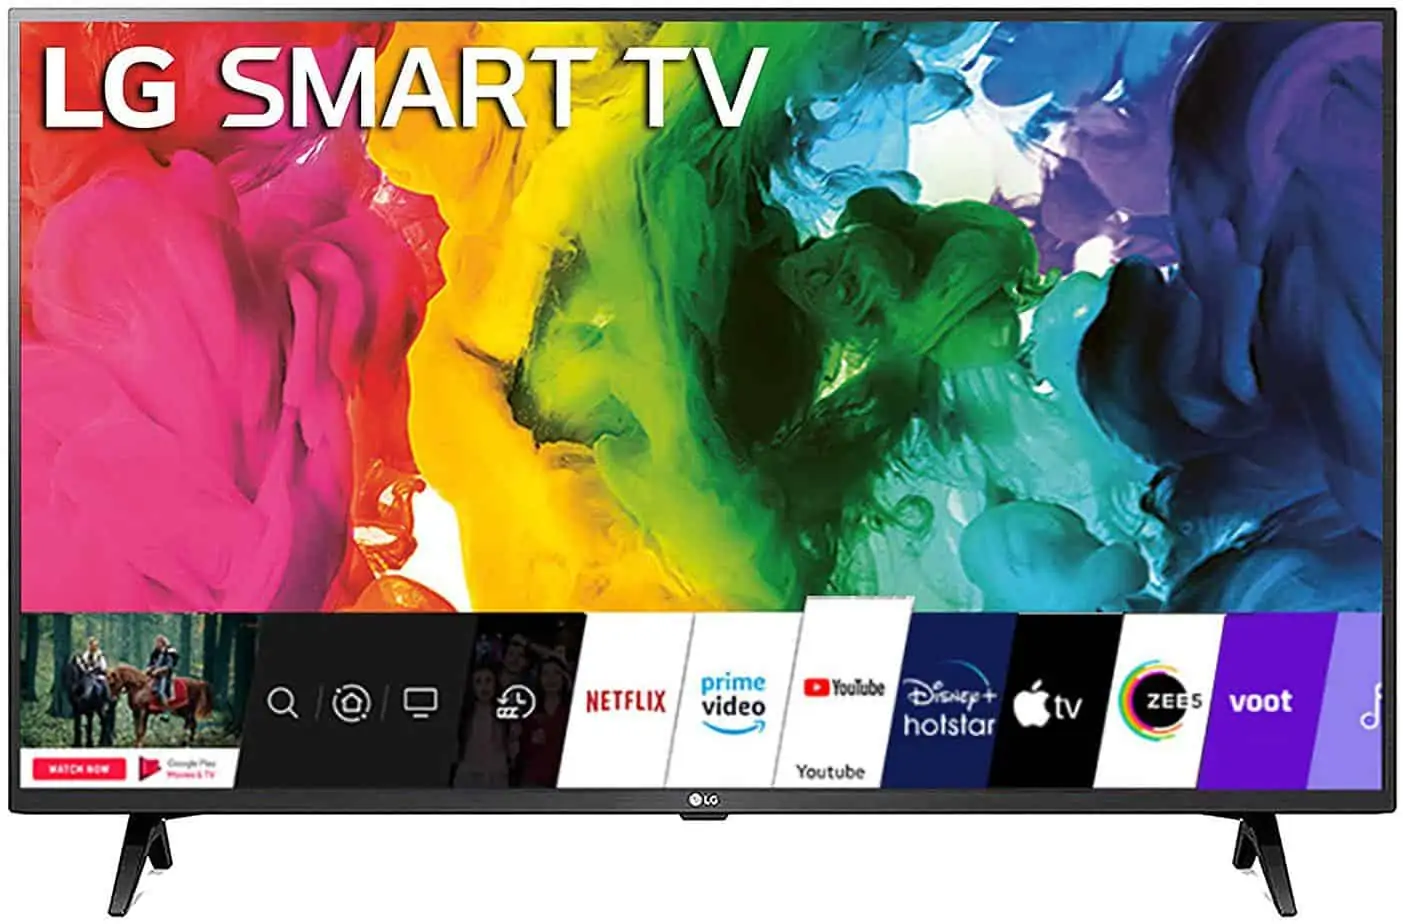 Full HD Smart TV of 43 inches from LG